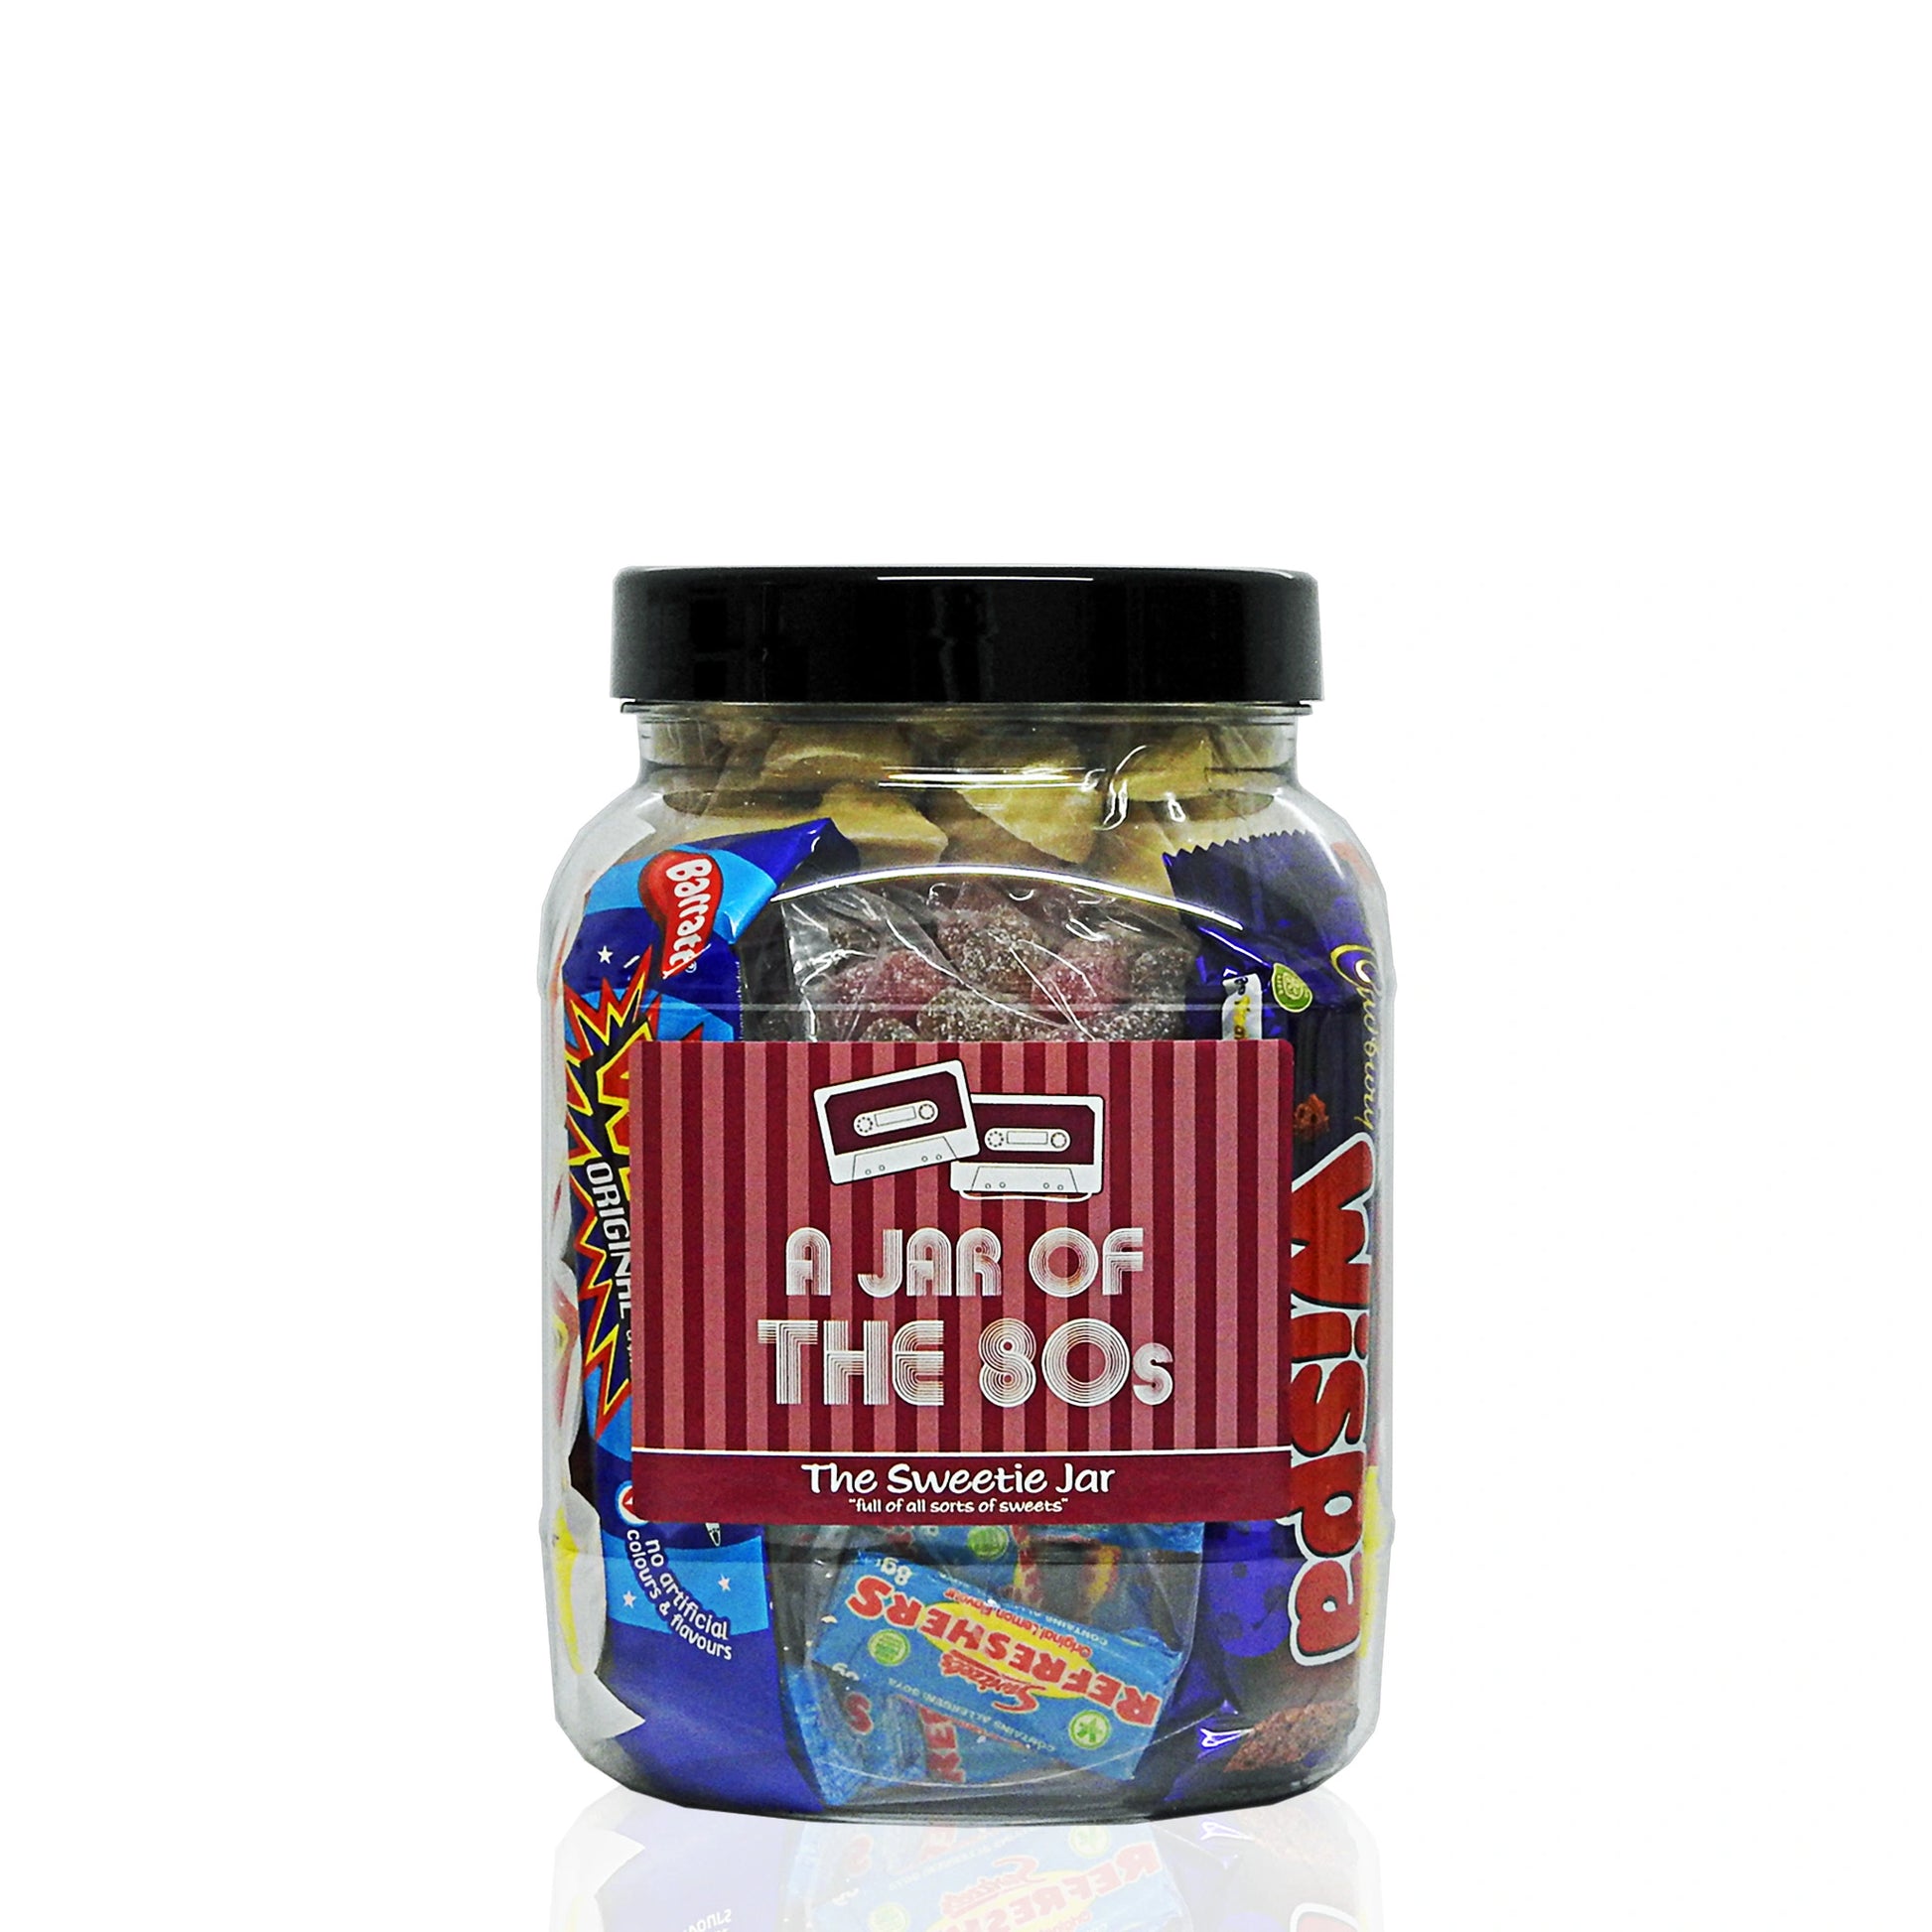 A Medium Sweet Jar of 80s Sweets - Full of Retro Sweets you'll remember from the 80s decade